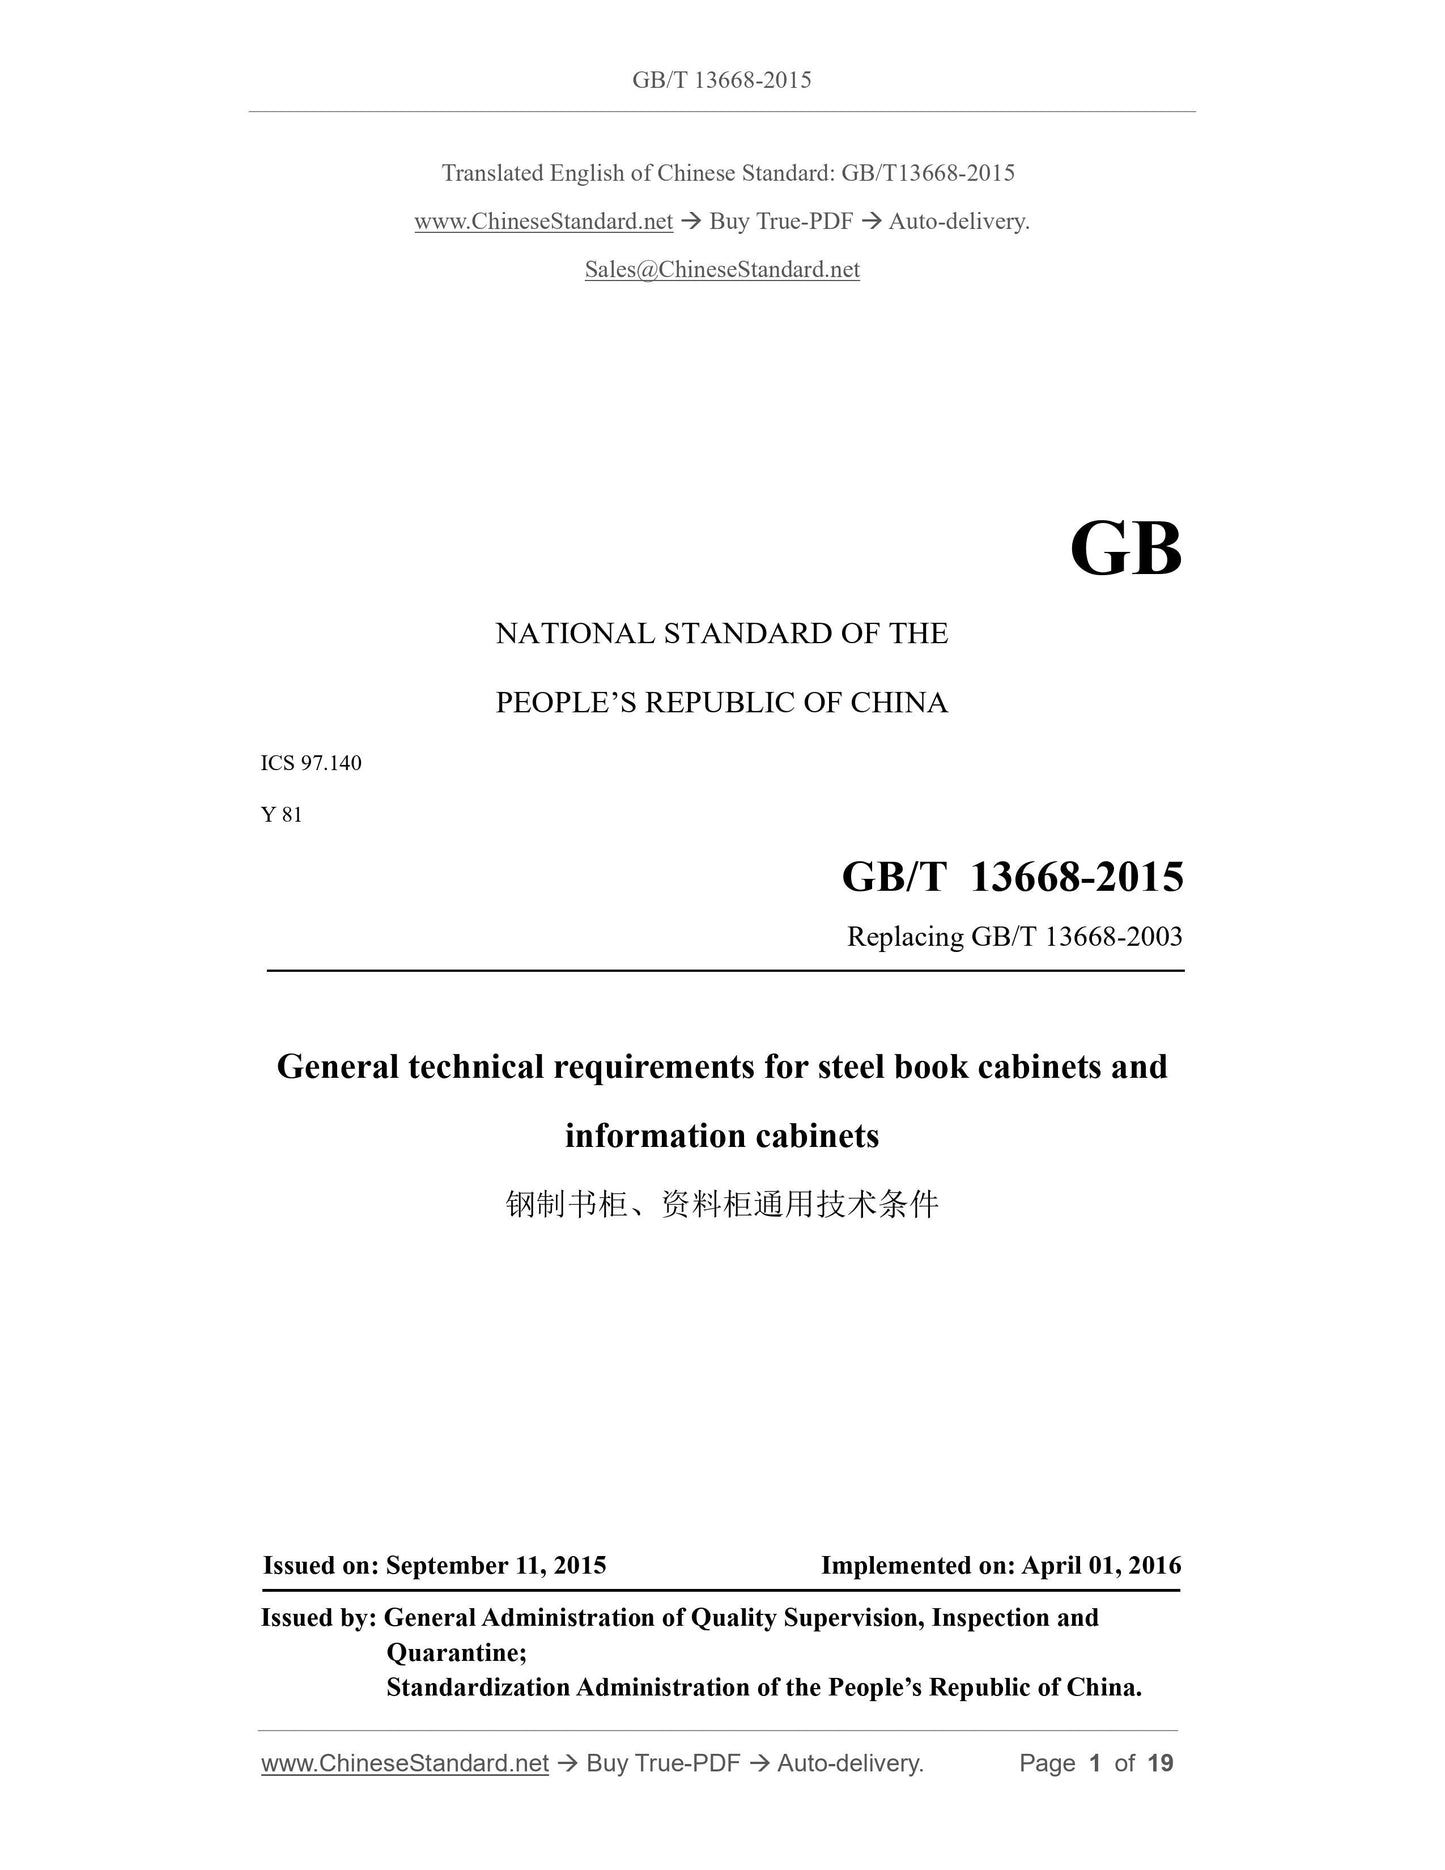 GB/T 13668-2015 Page 1